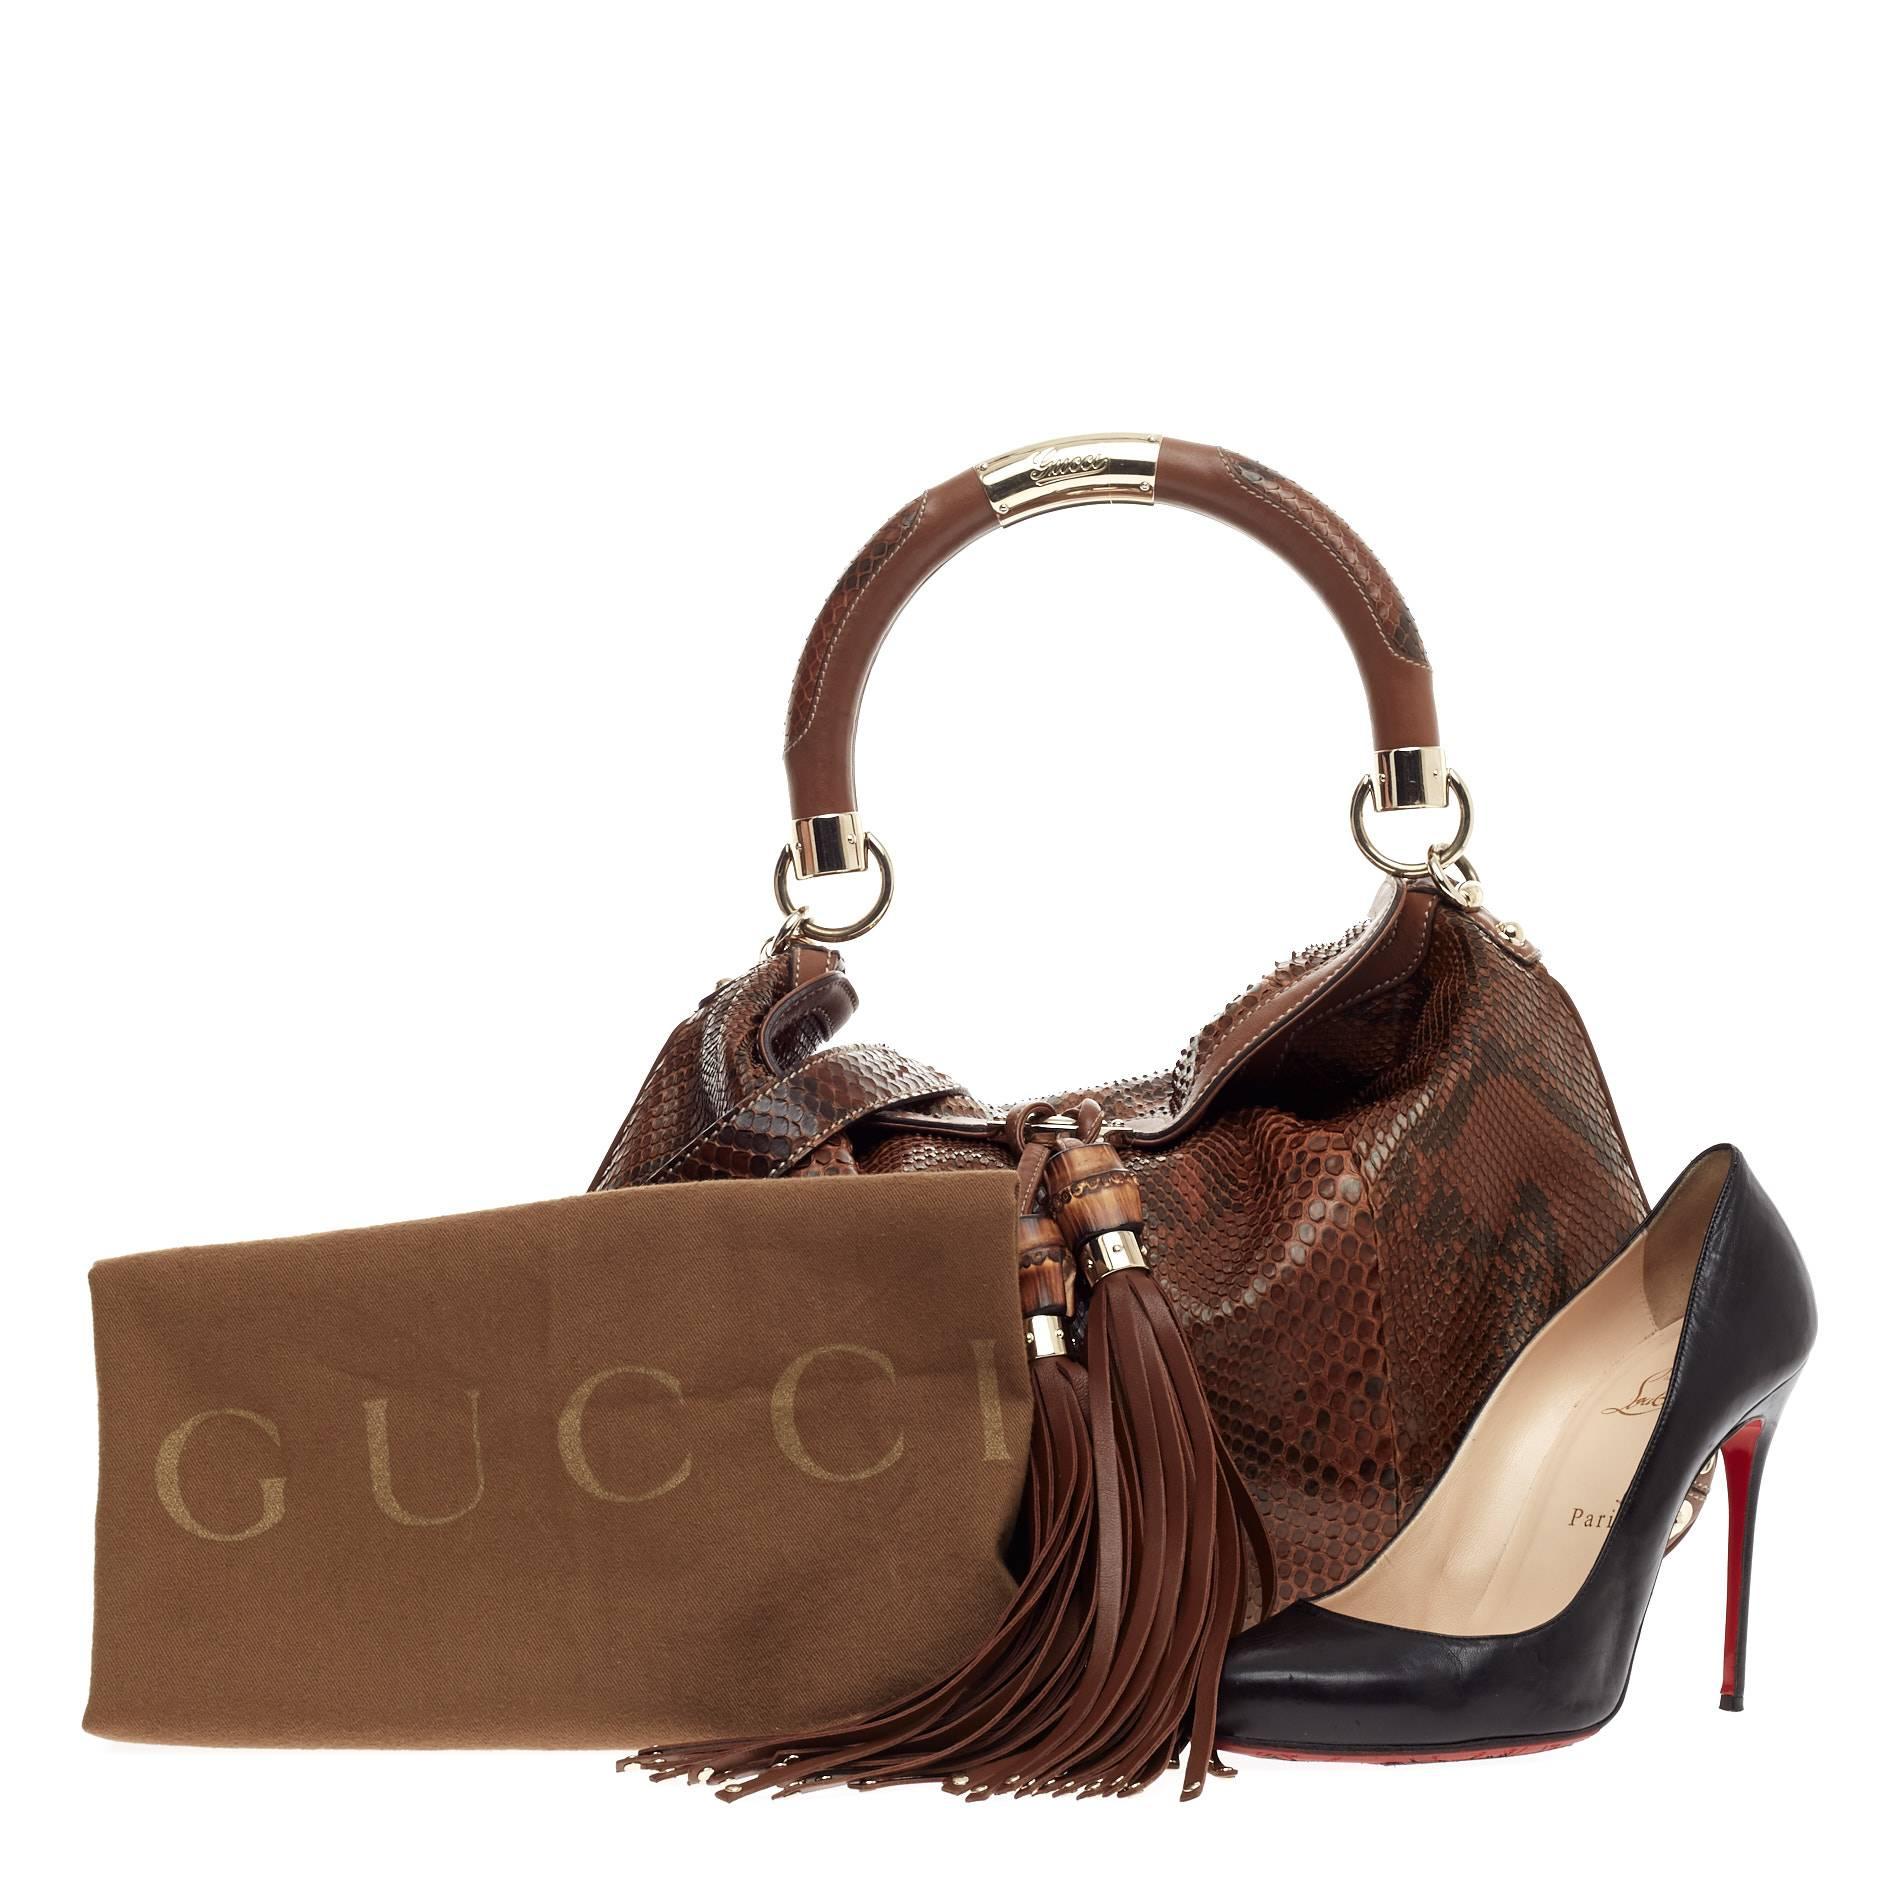 This authentic Gucci Indy Hobo Python Medium showcases the brand's classic design with luxurious detailing adding an exotic chic twist. Crafted from genuine dark brown python skin, this eye-catching hobo features bamboo and fringe tassels, chrome